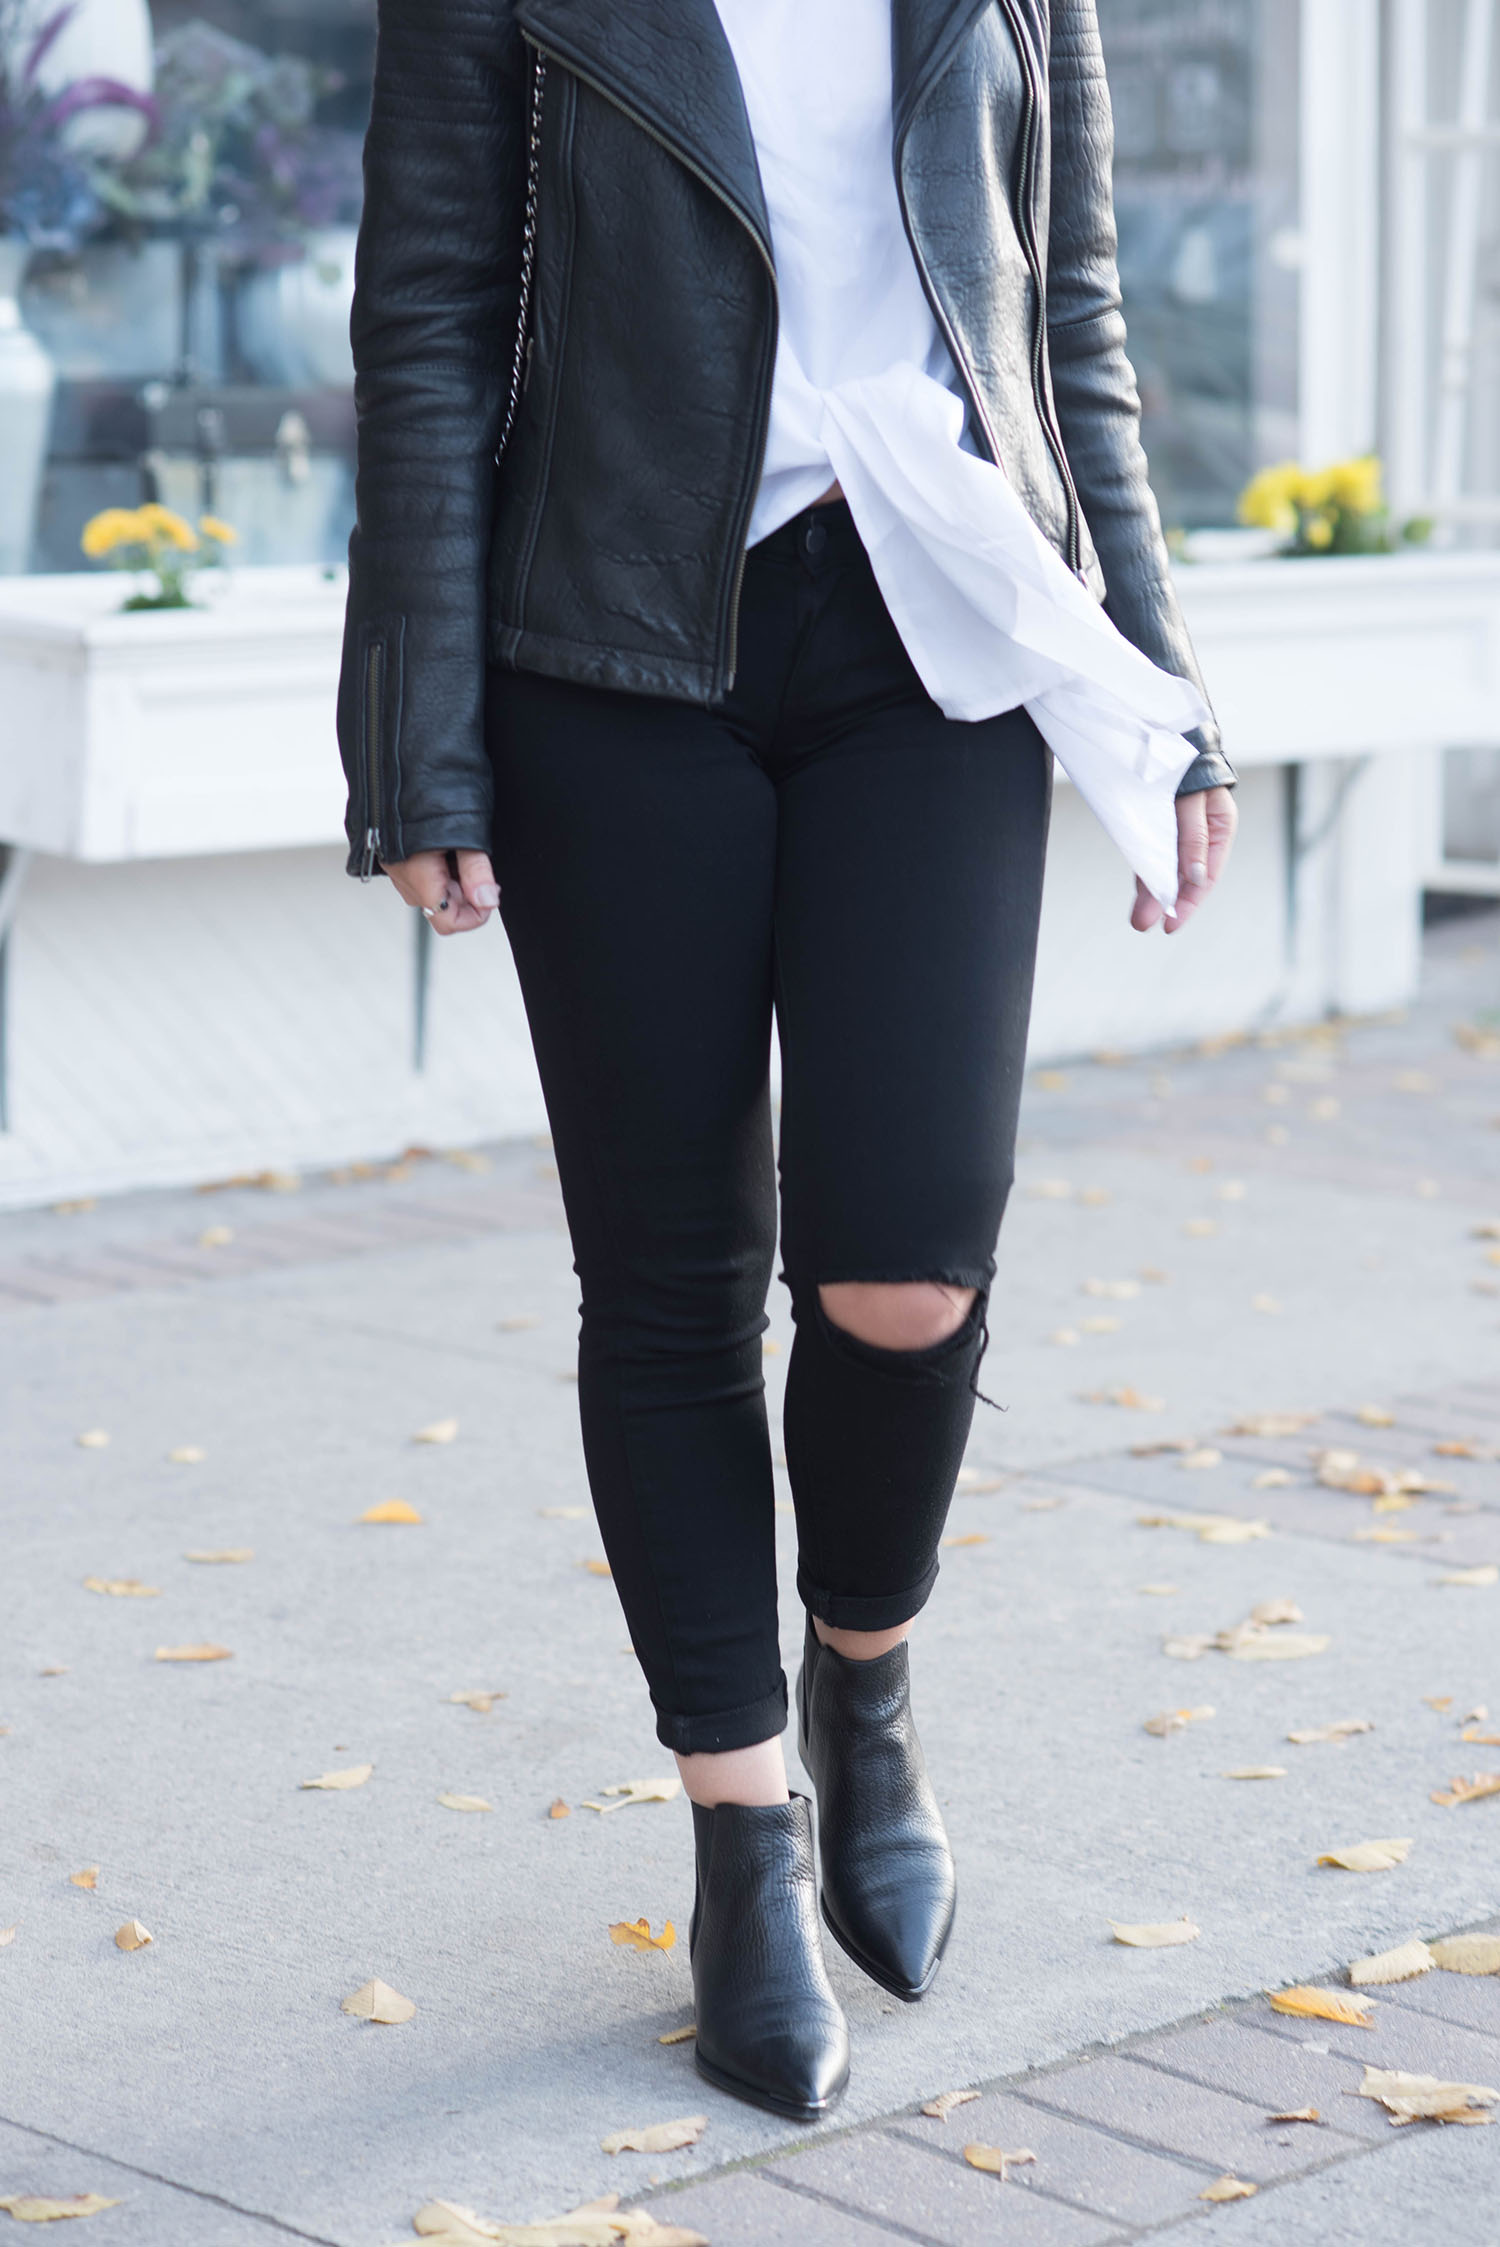 Outfit details on fashion blogger Cee Fardoe of Coco & Vera, including Paige jeans and Acne Studios Jensen boots